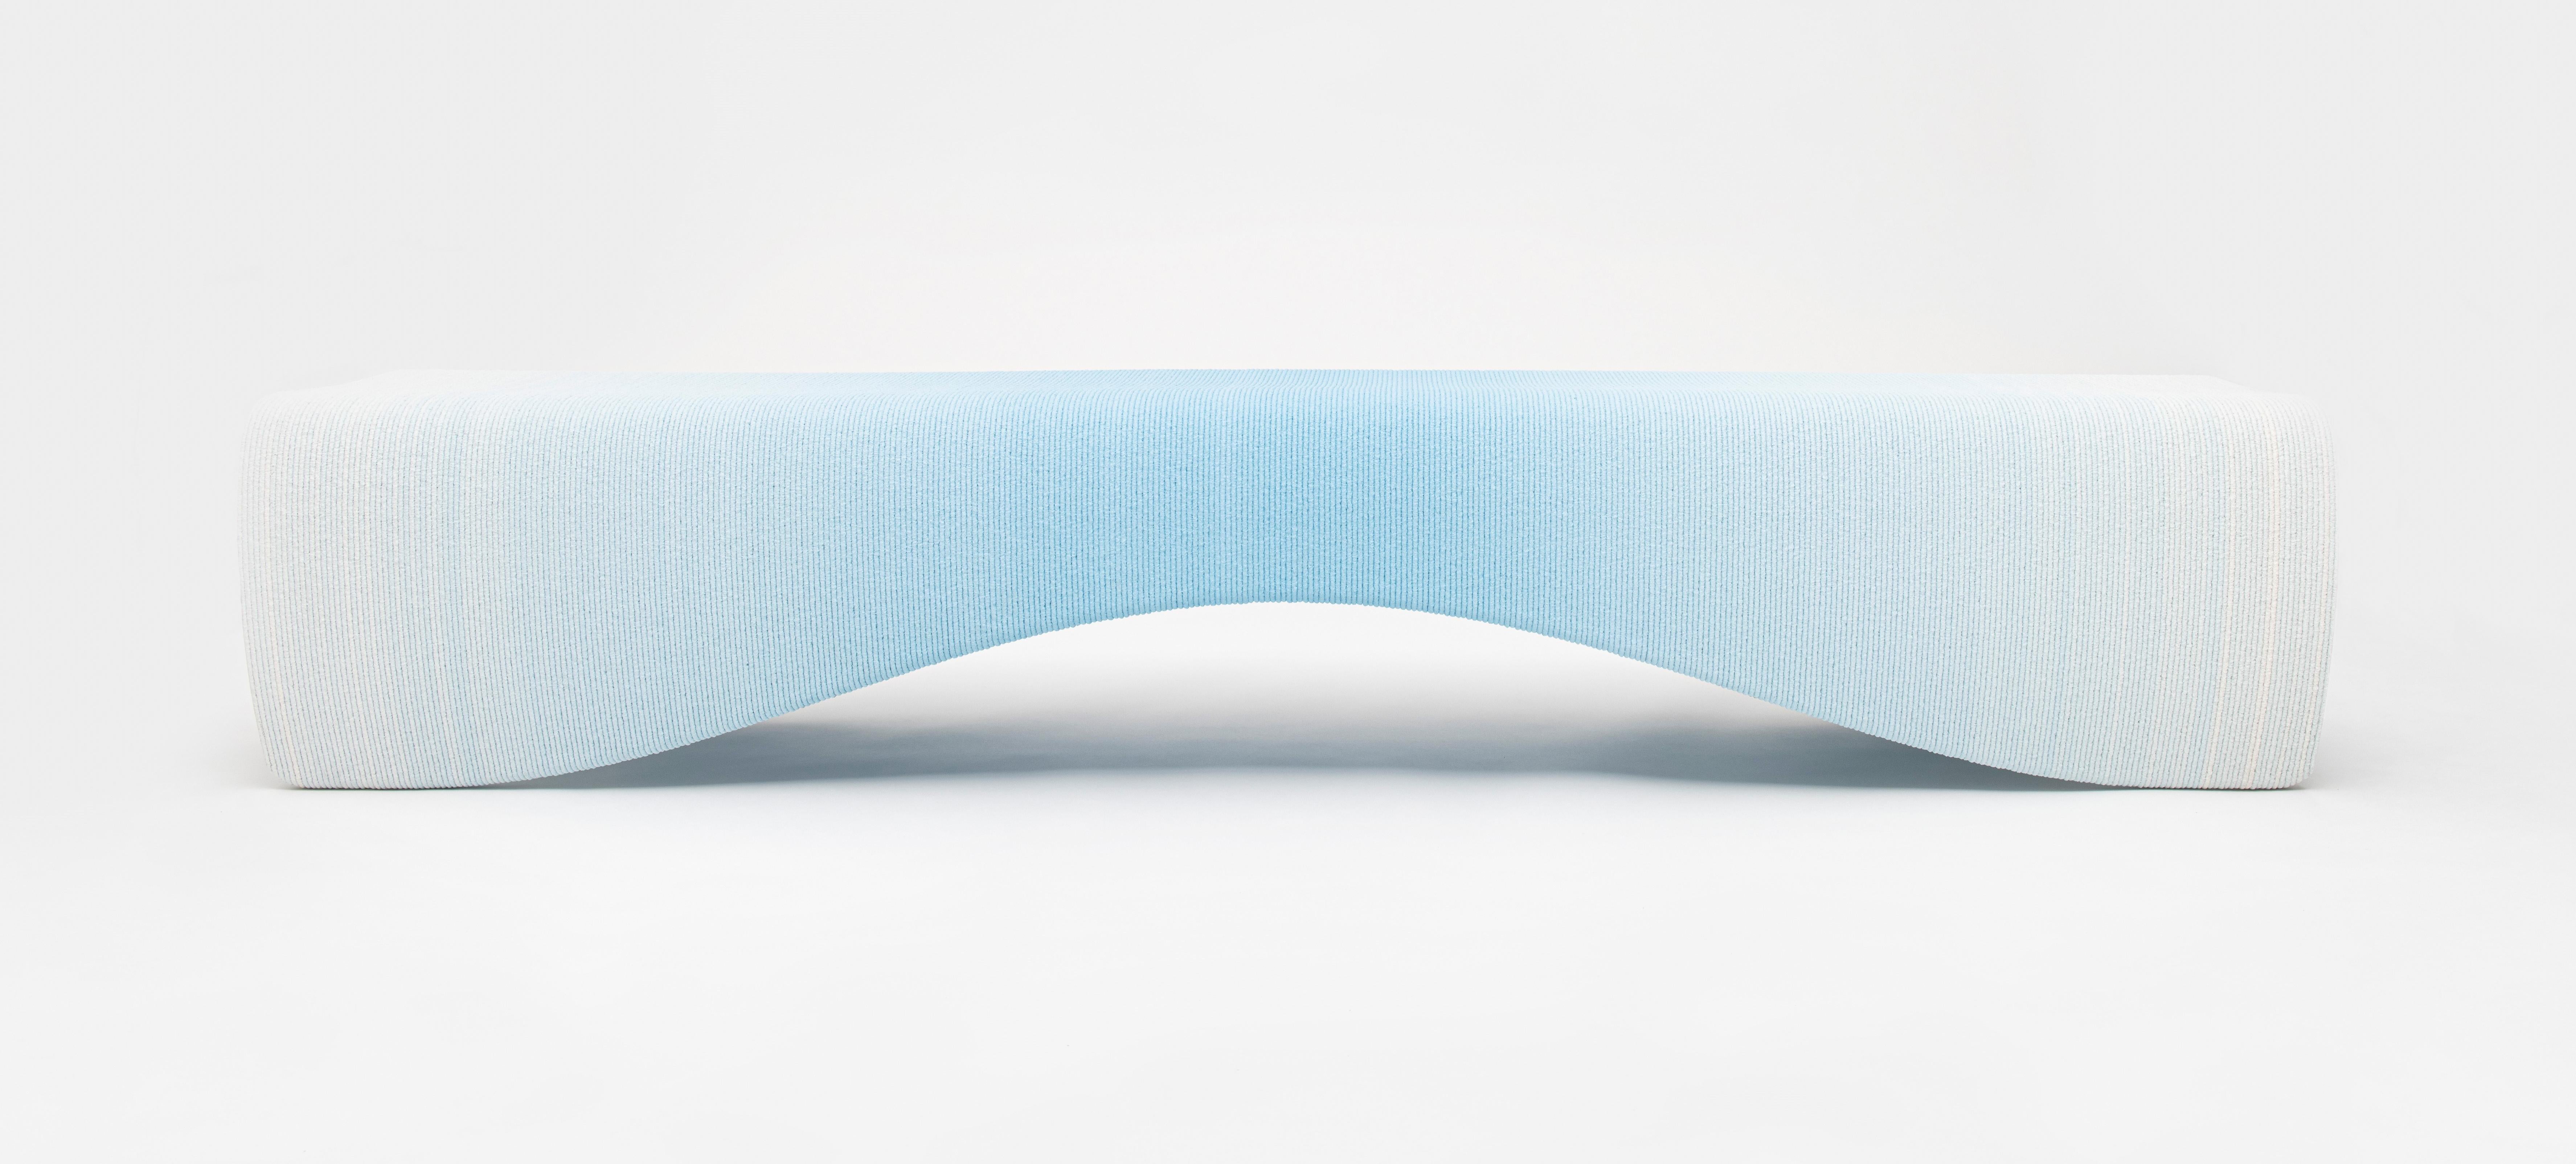 Large gradient bench by Philipp Aduatz
Limited Edition of 50
Dimensions: 230 x 56 x 45 cm
Materials: 3D printed concrete dyed, reinforced with steel

Also available in small.
Available in red, blue, beige, green and black.

The 3D printed